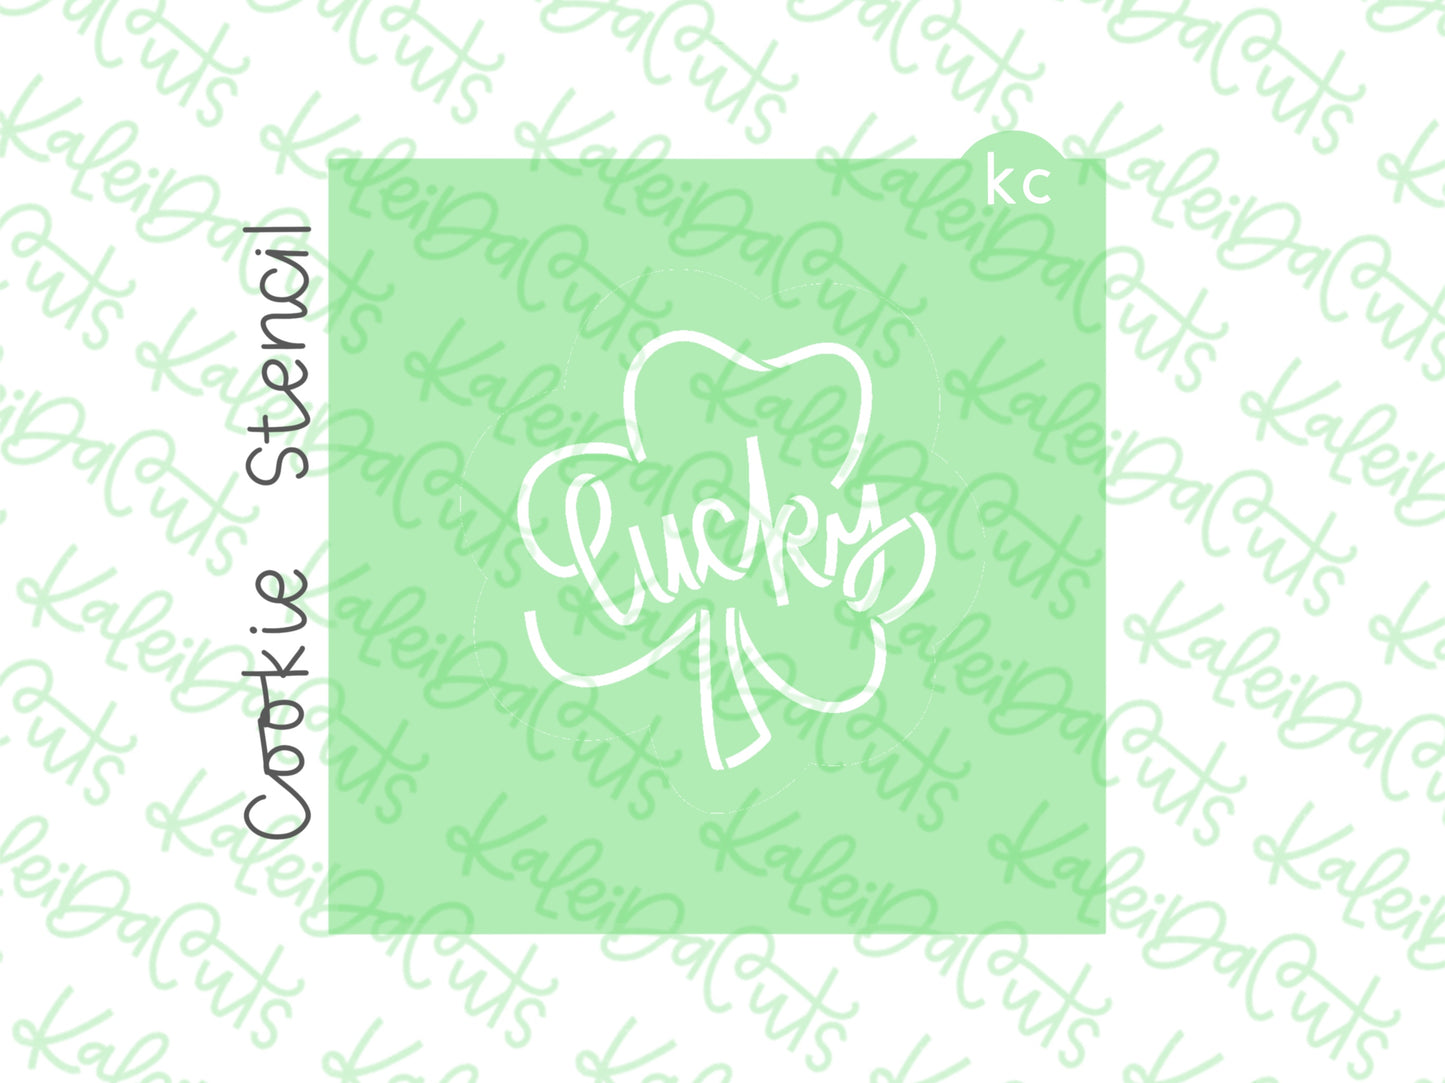 Lucky Clover Lettered Stencil